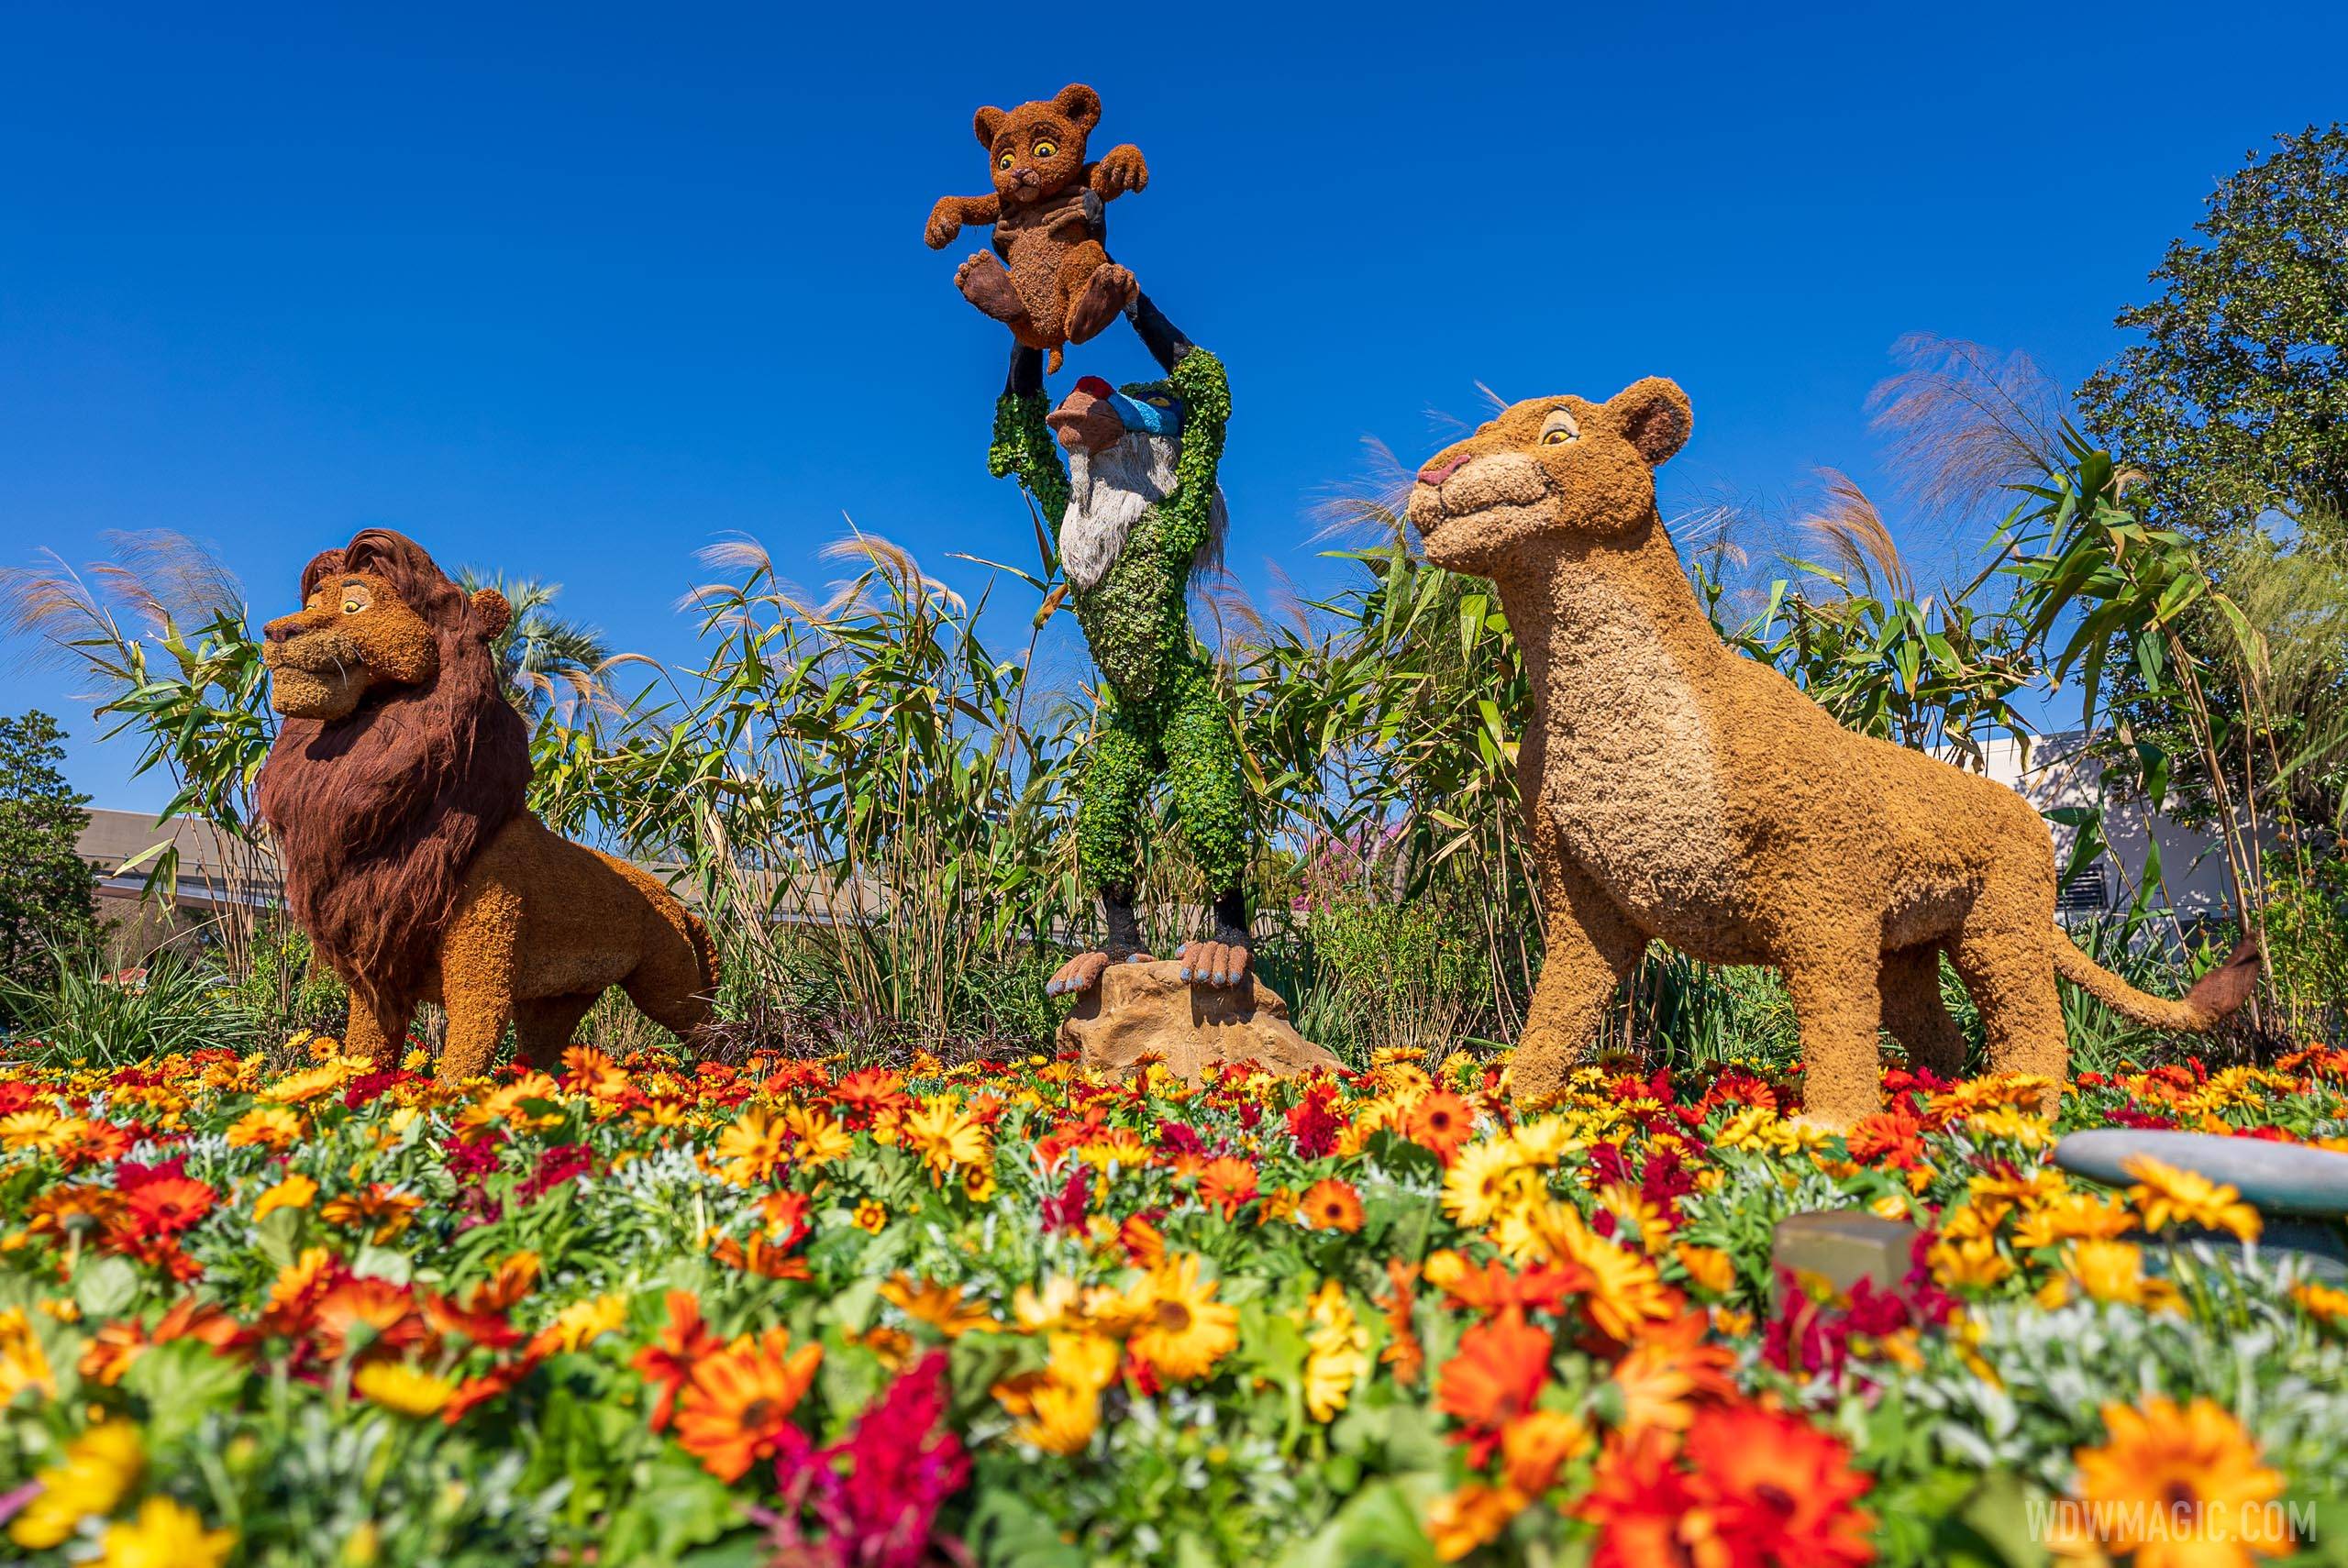 PHOTOS - Tour the topiary at the 2021 Taste of EPCOT International Flower and Garden Festival